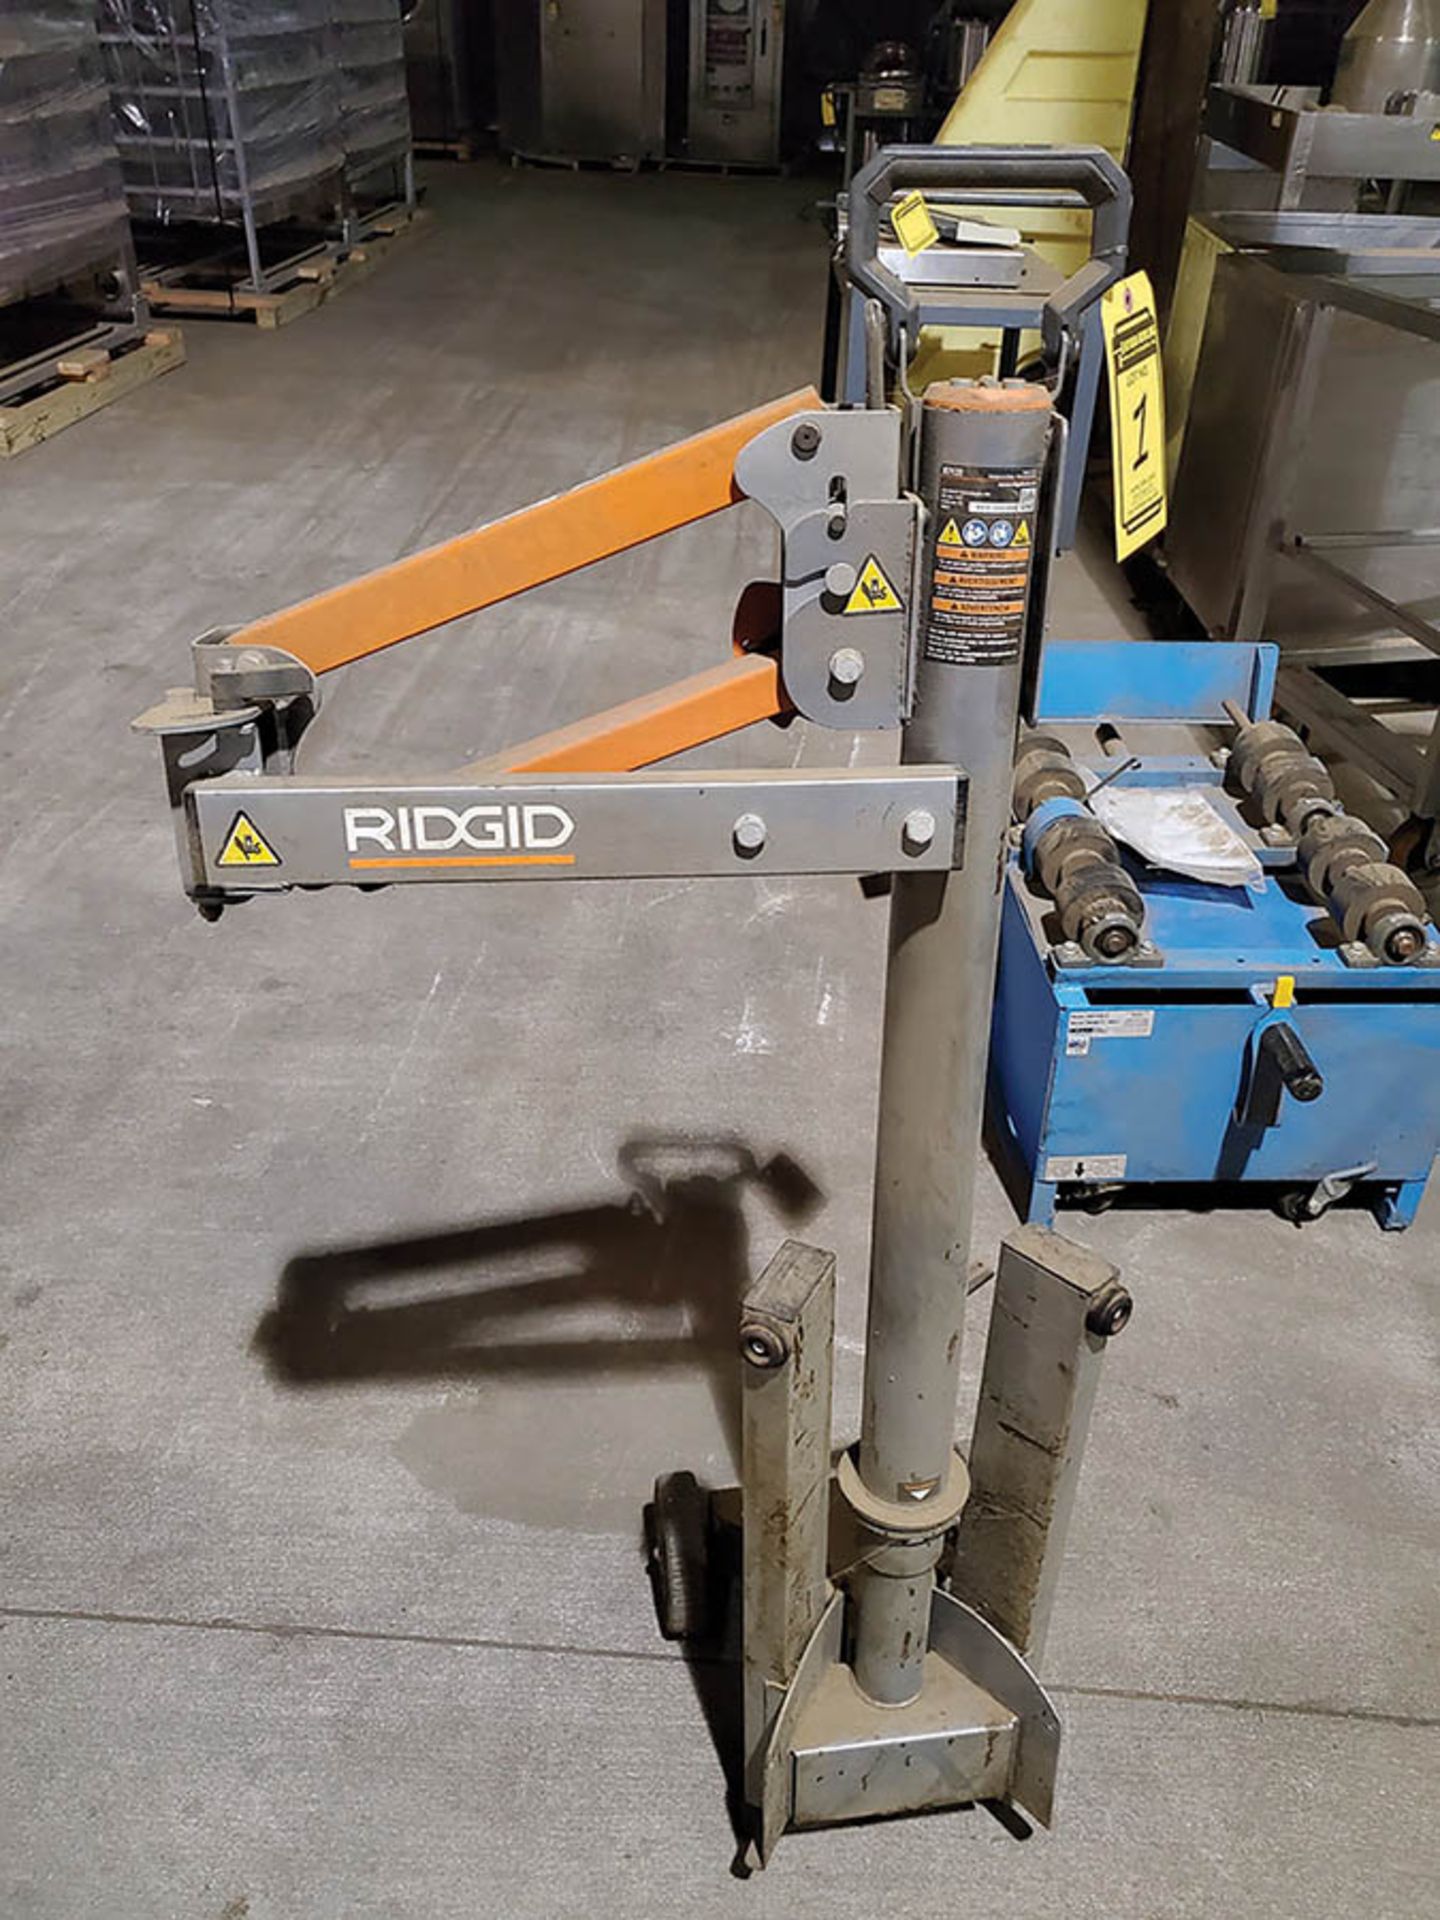 RIDGID R7133 PORTABLE DRILL STAND, OUTRIGGERS, STABILIZING ARM